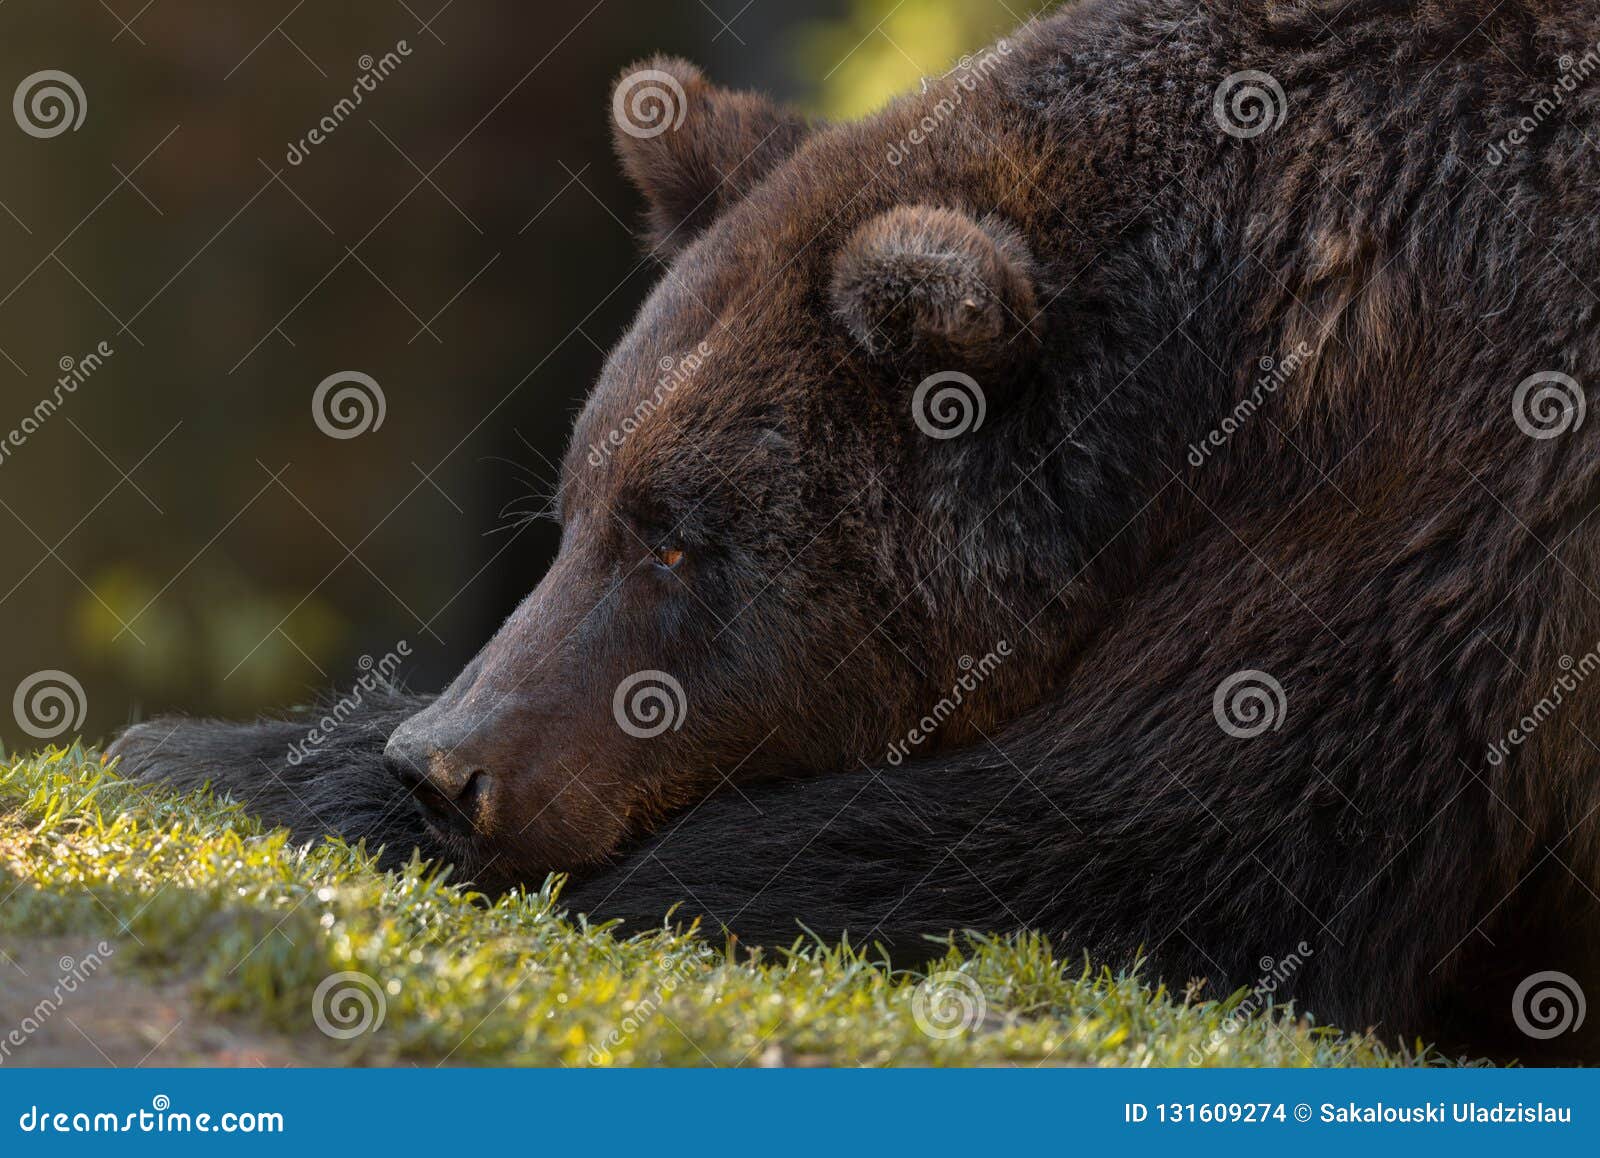 dreams: artistic picture of big european brown bear close-up. photo of great bear ursidae, ursus arctos with expressive sad ey